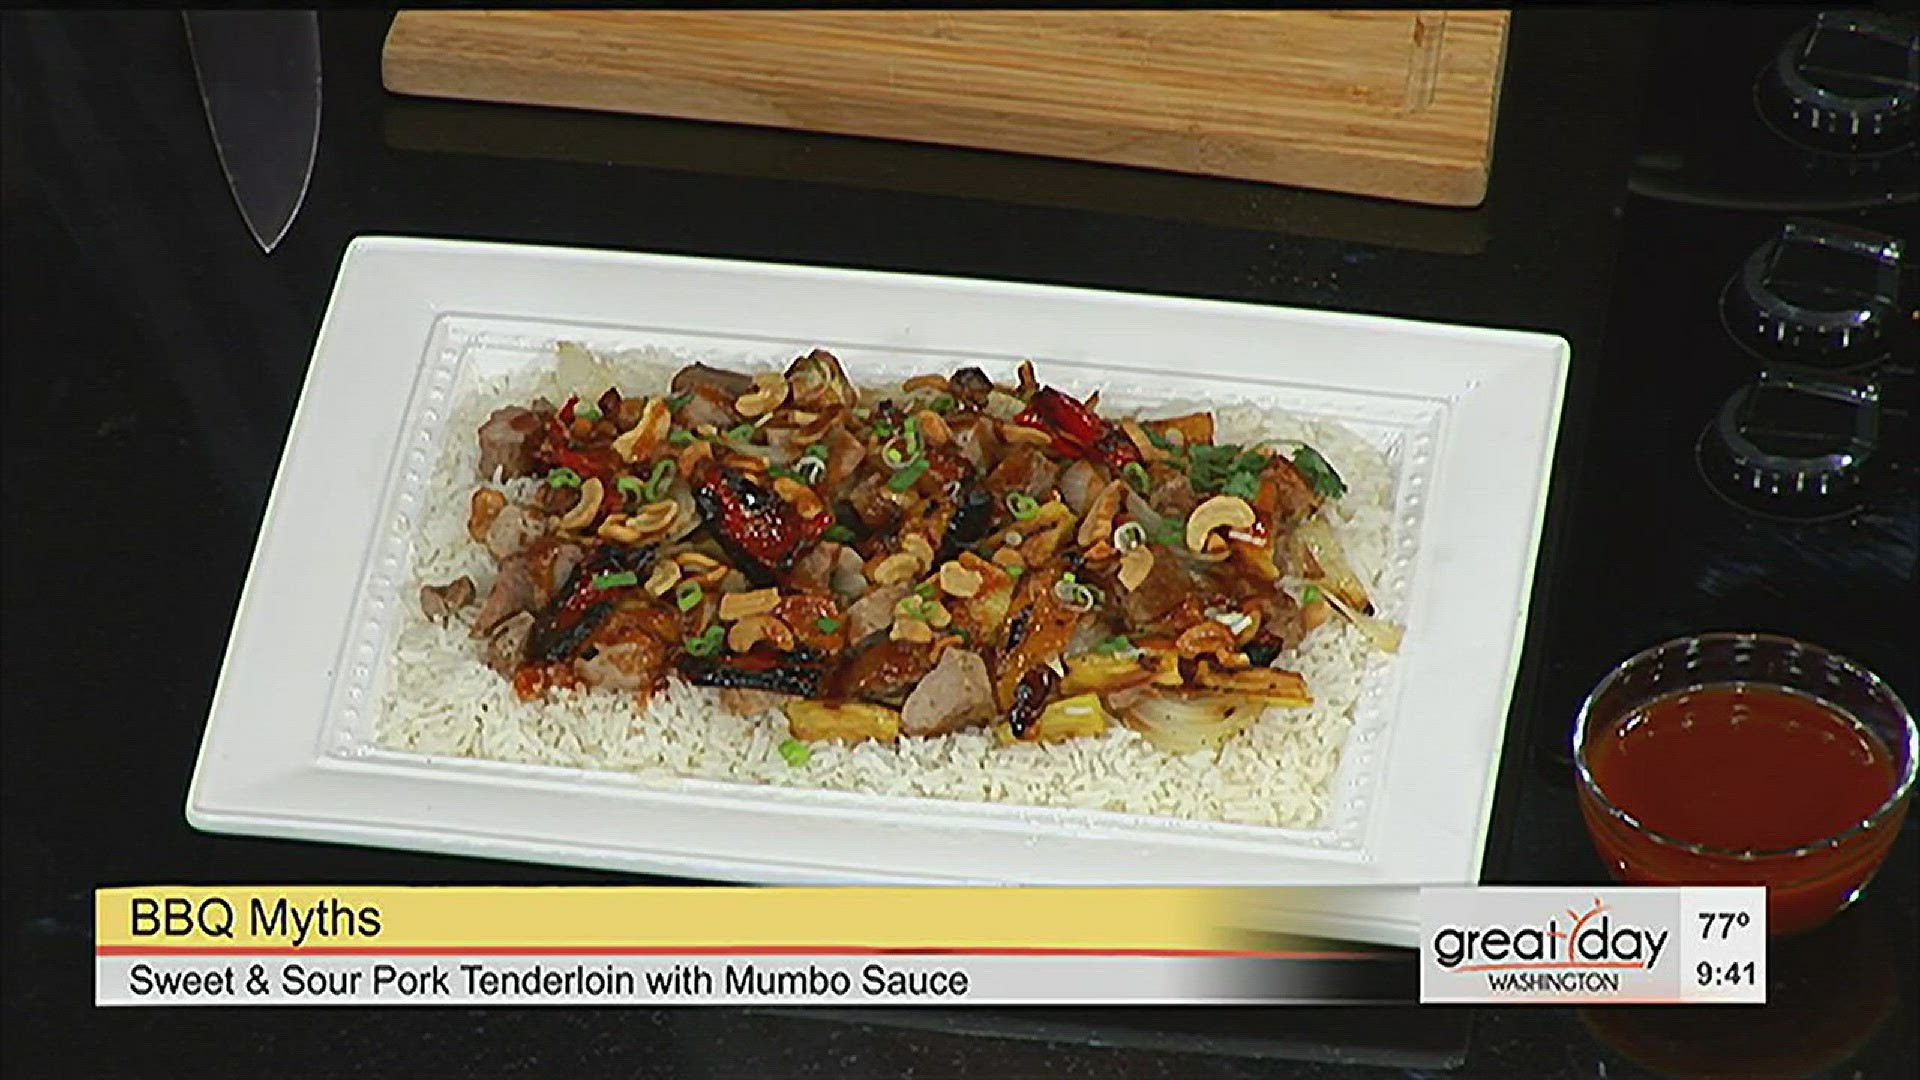 Grilling genius Meathead Goldwyn makes a sweet & sour pork tenderloin with mumbo sauce and explains some grilling myths.